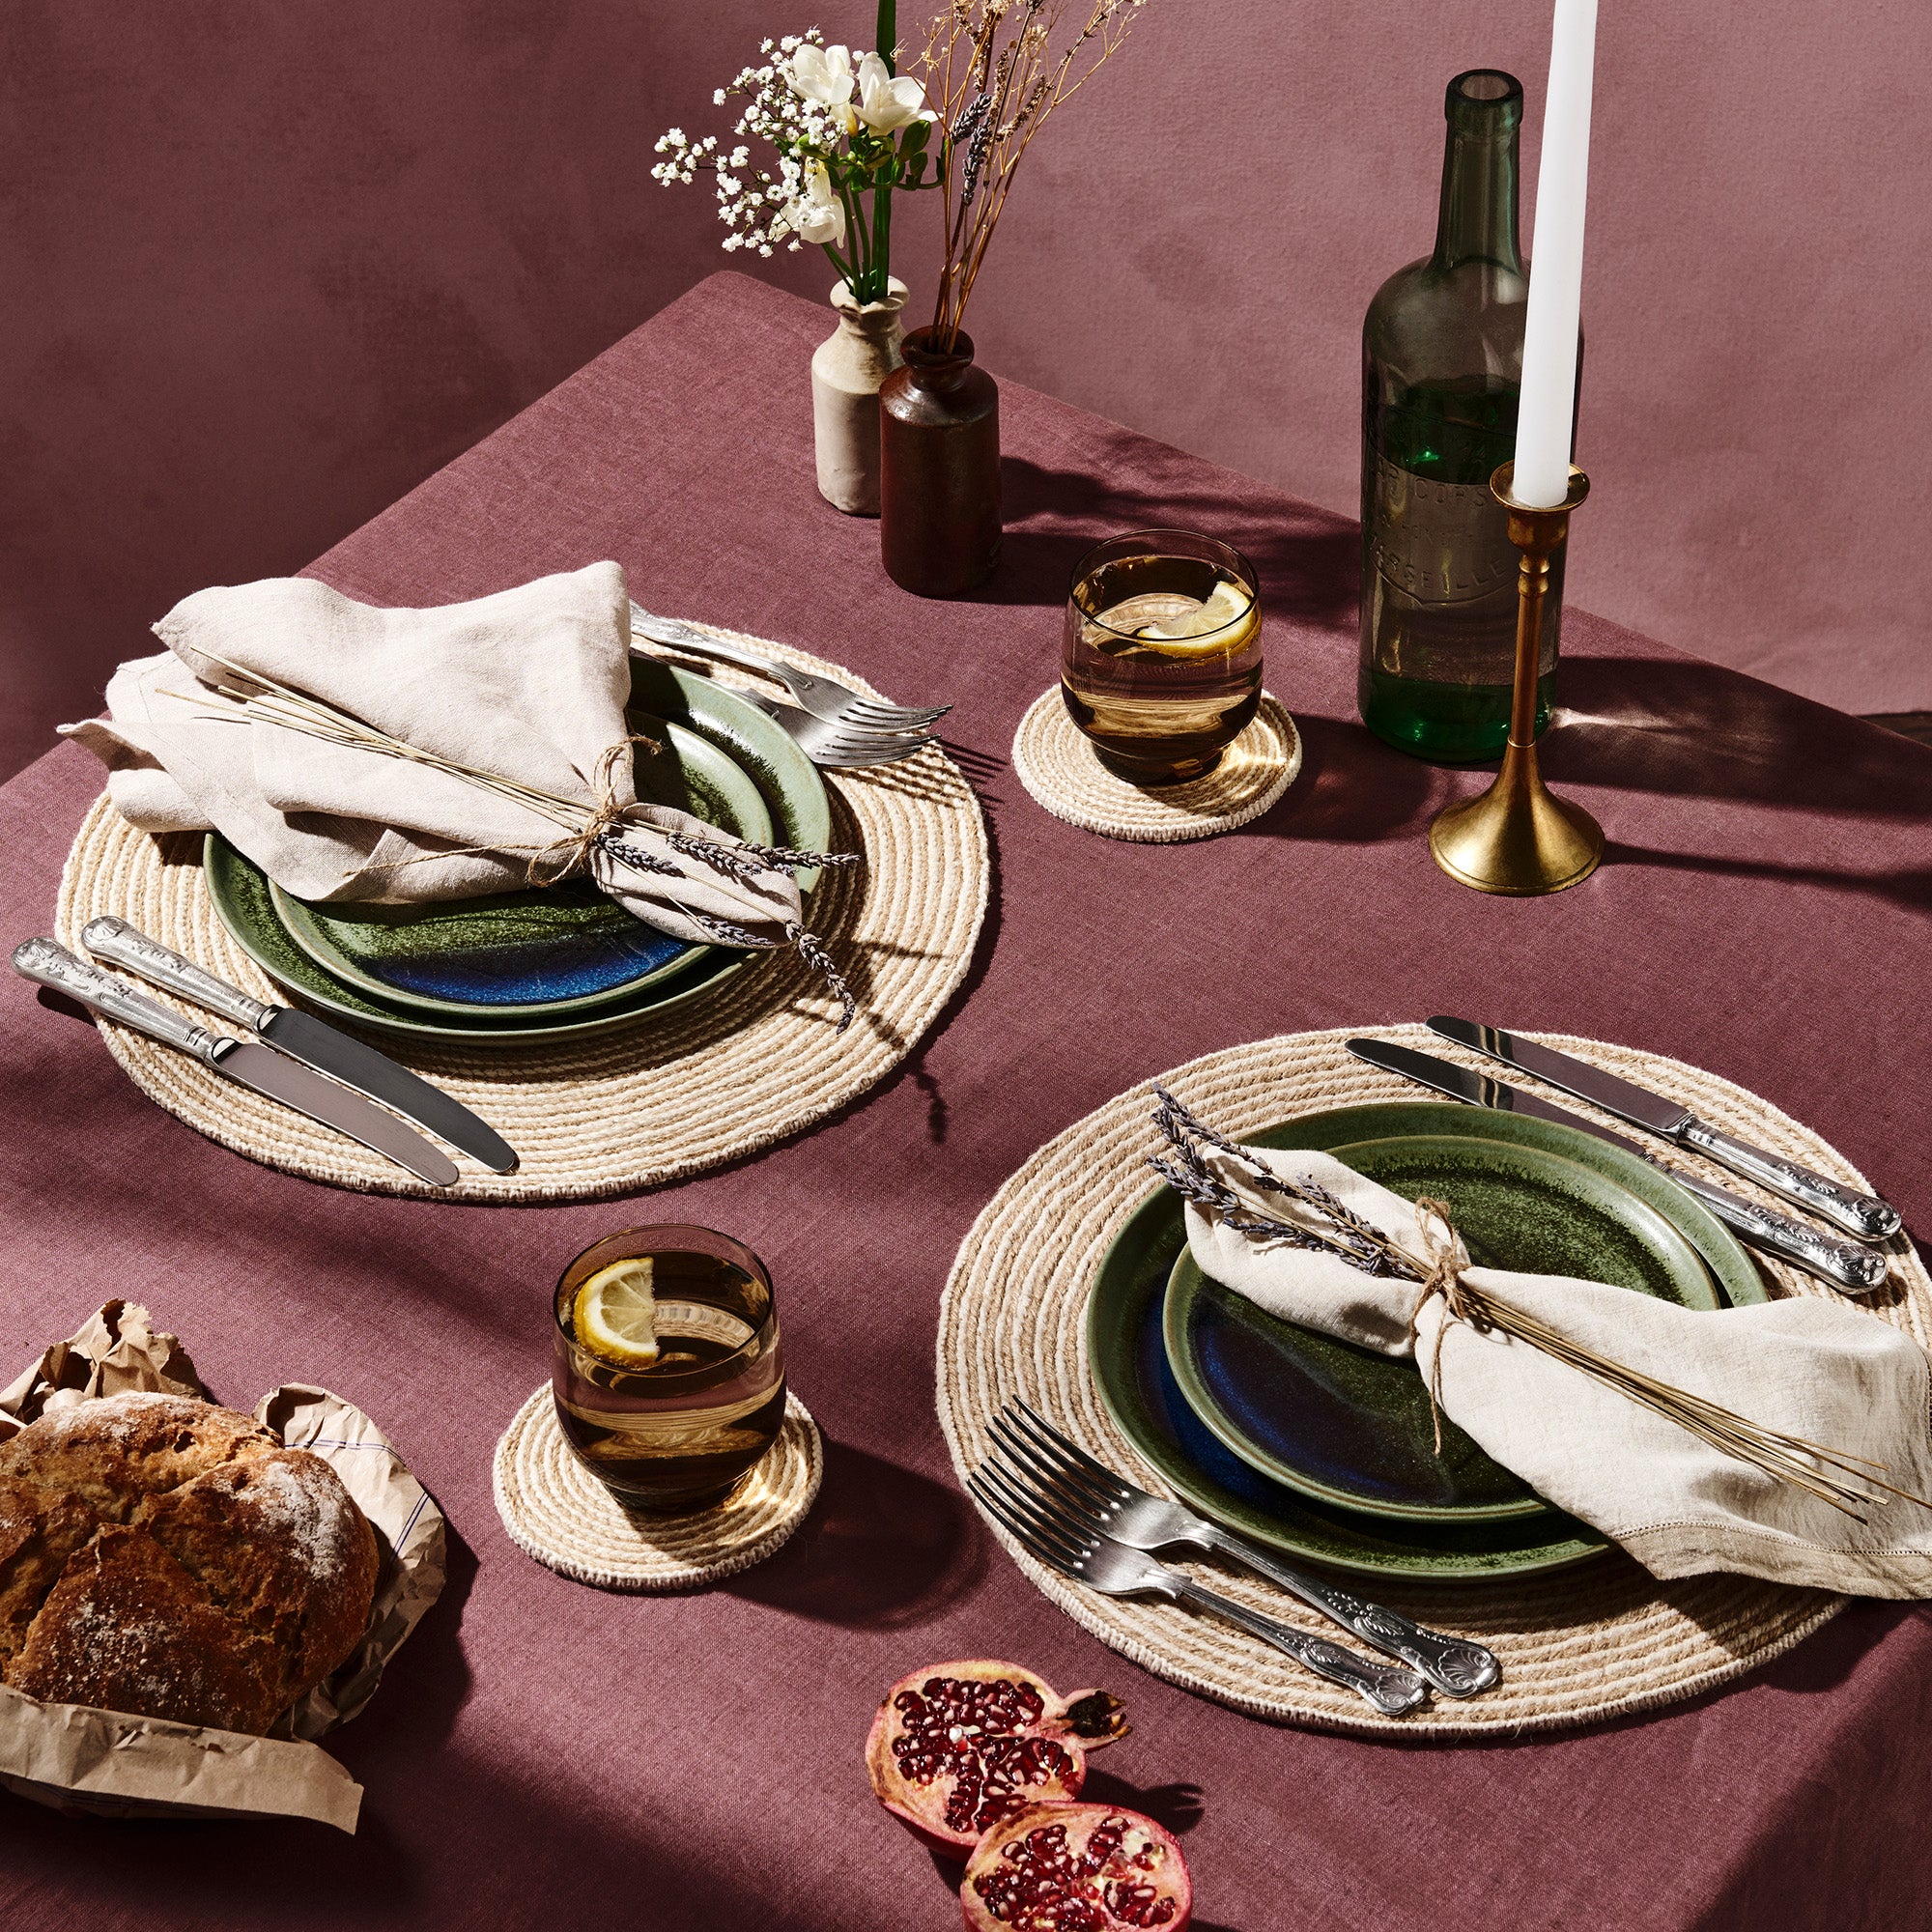 Dining table setting with placemats, coasters, napkins on green plates, candlesticks, flowers, bread and pomegranate